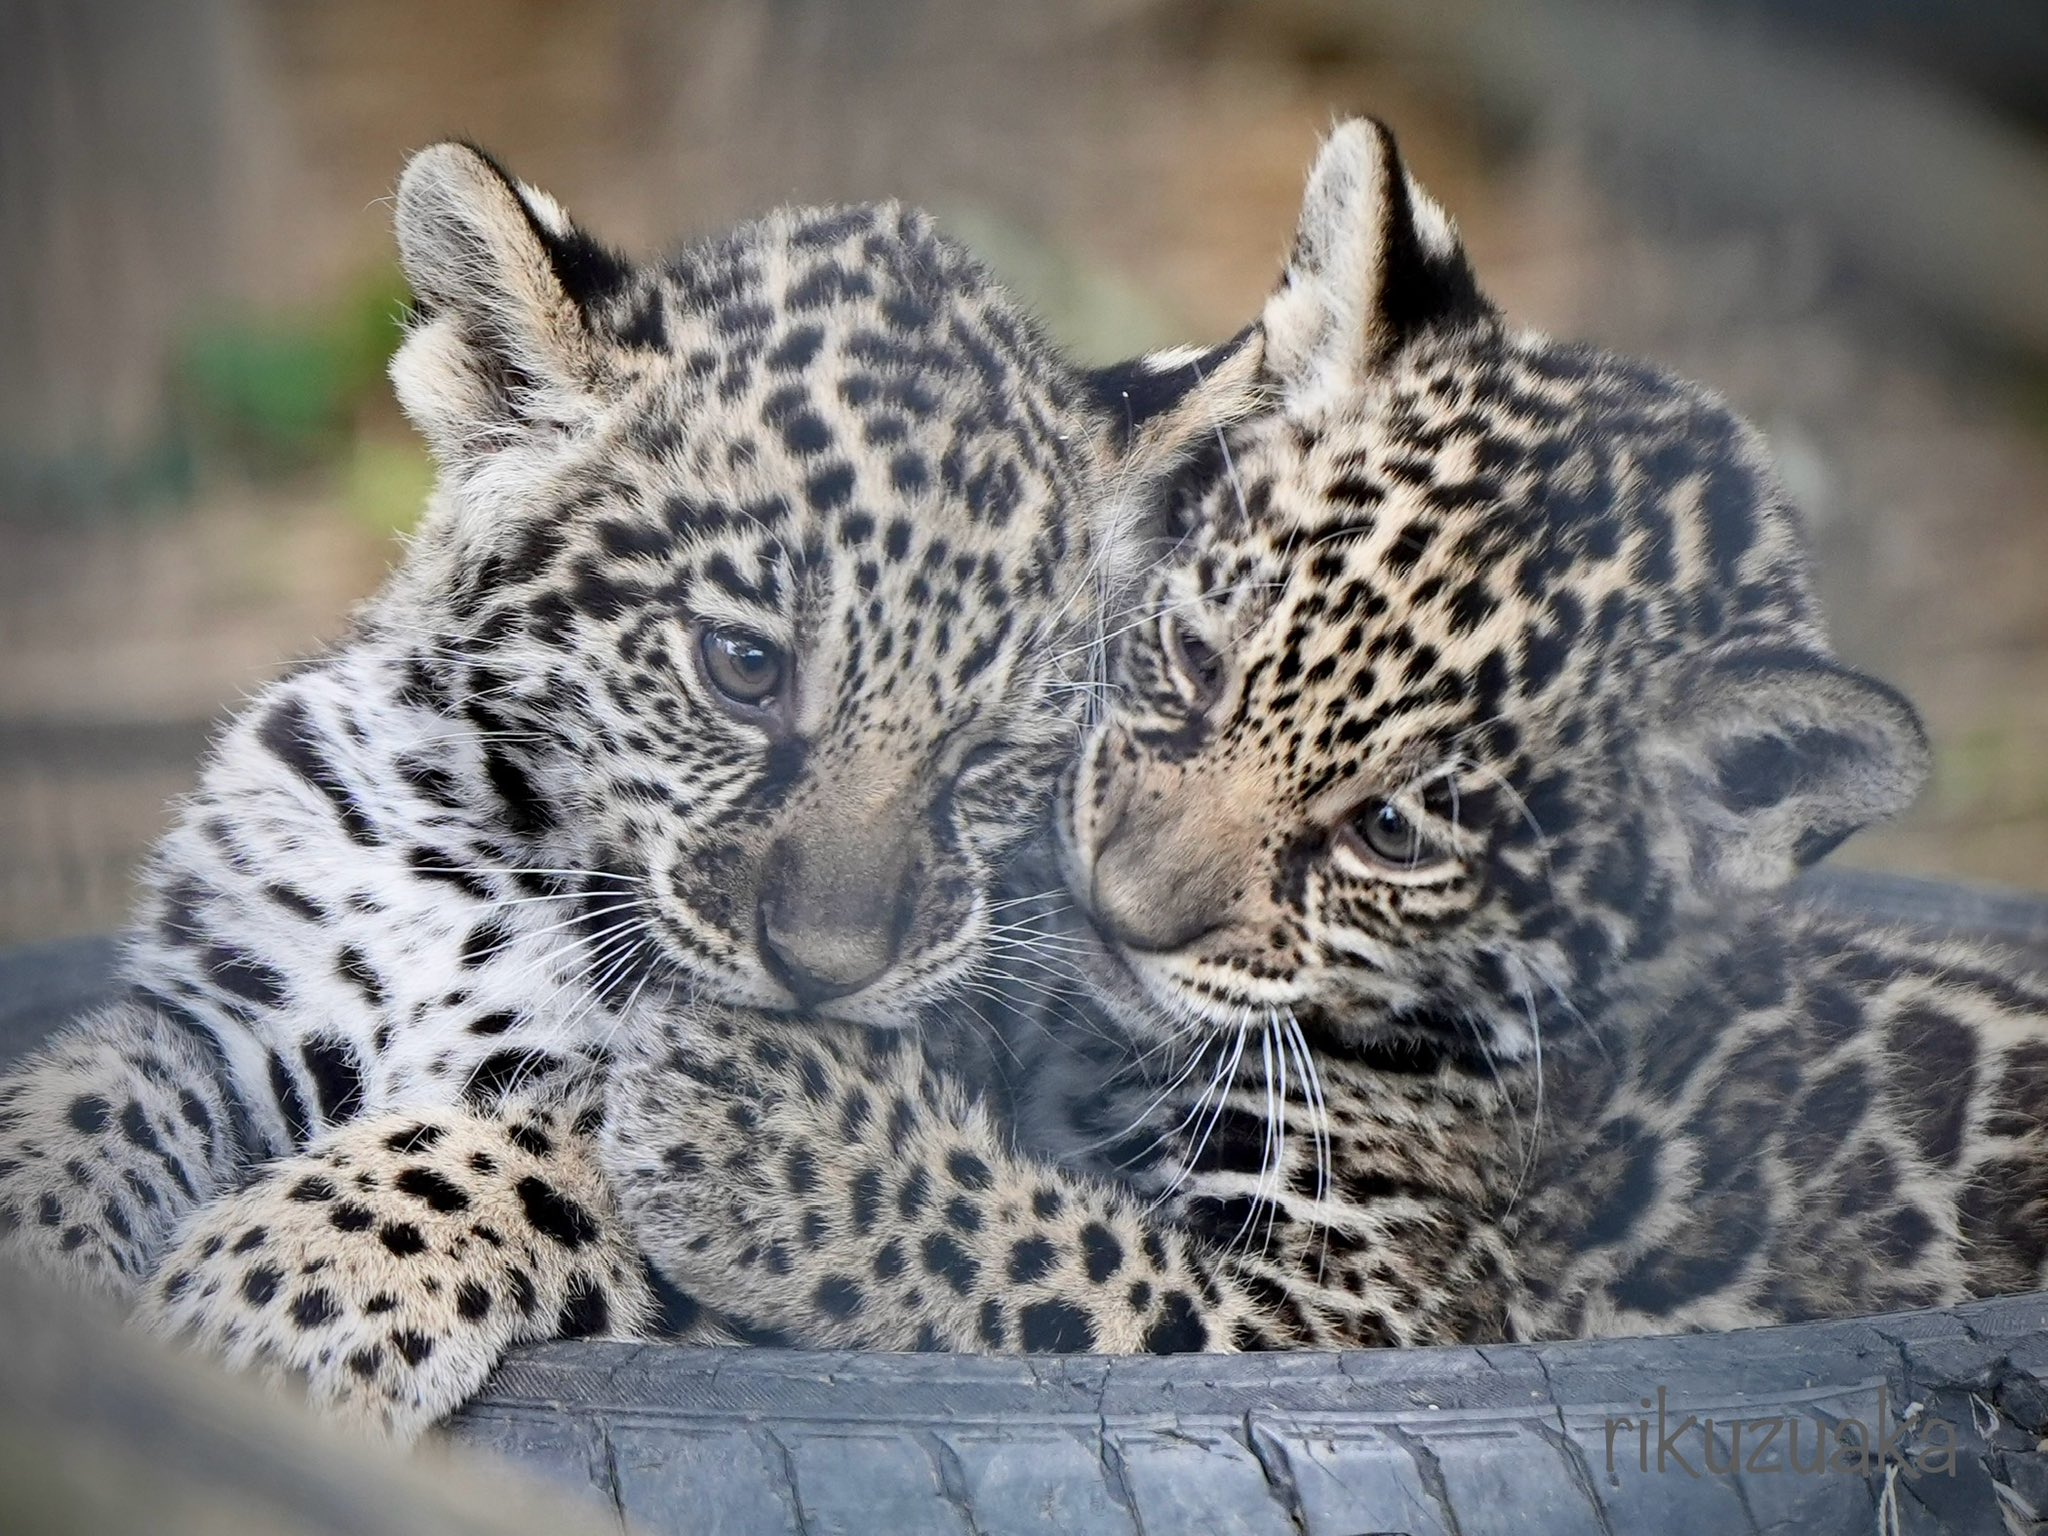 Kiss on the paw :3 - Wild animals, Zoo, Predatory animals, Cat family, Big cats, Kus, Jaguar, Young, Tires